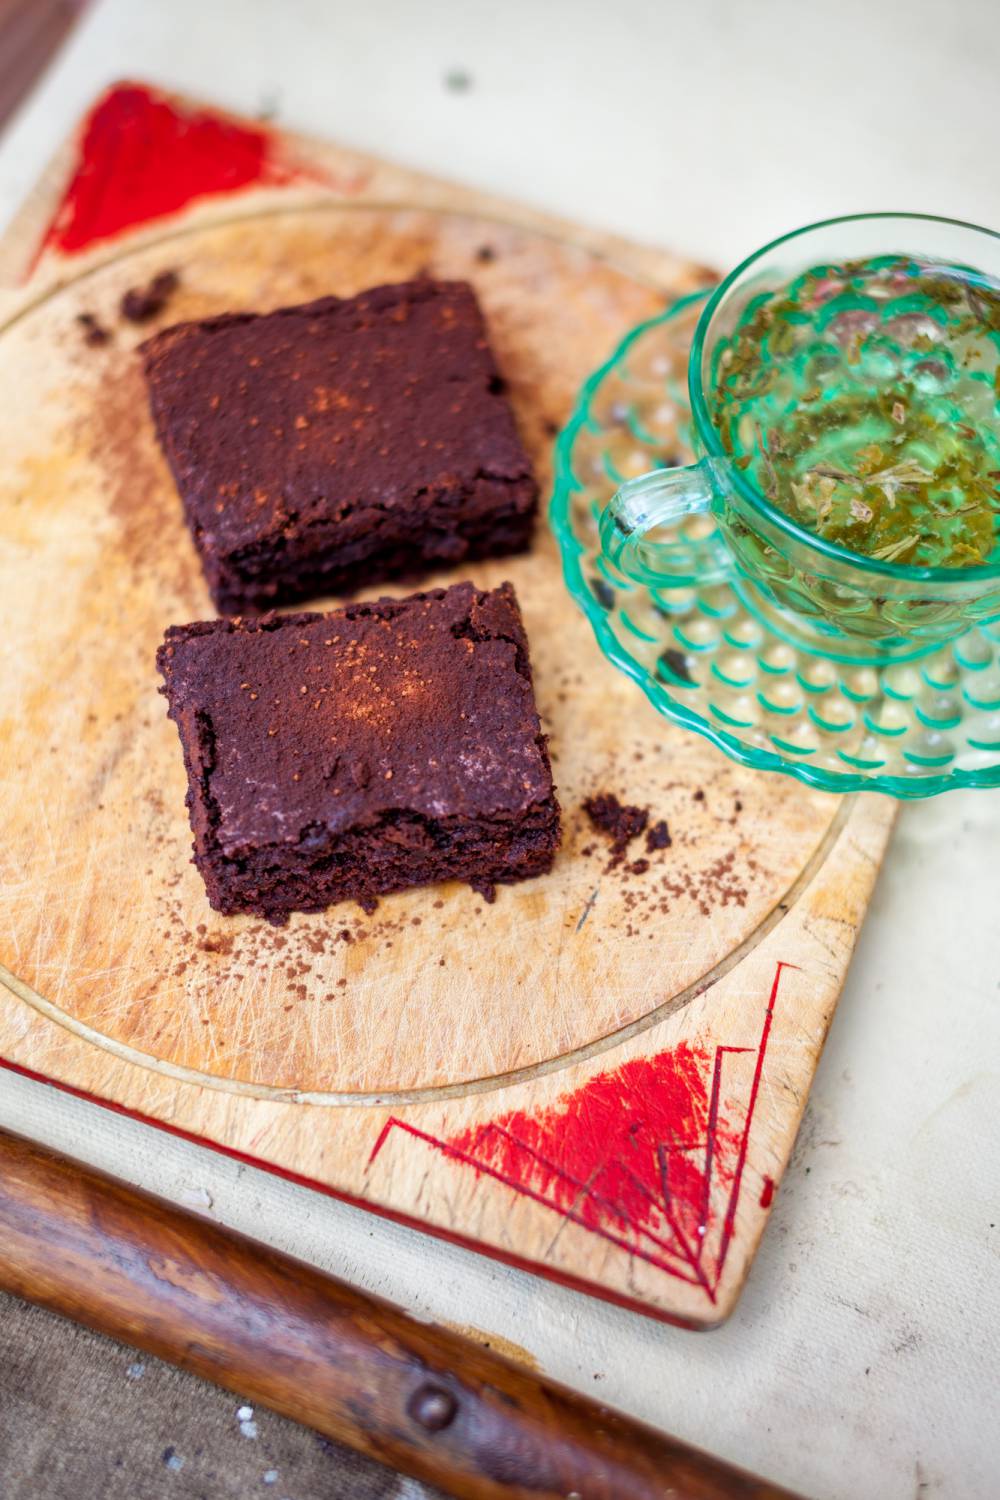 Beetroot Brownies - A Healthier Way to Stem Your Chocolate Cravings